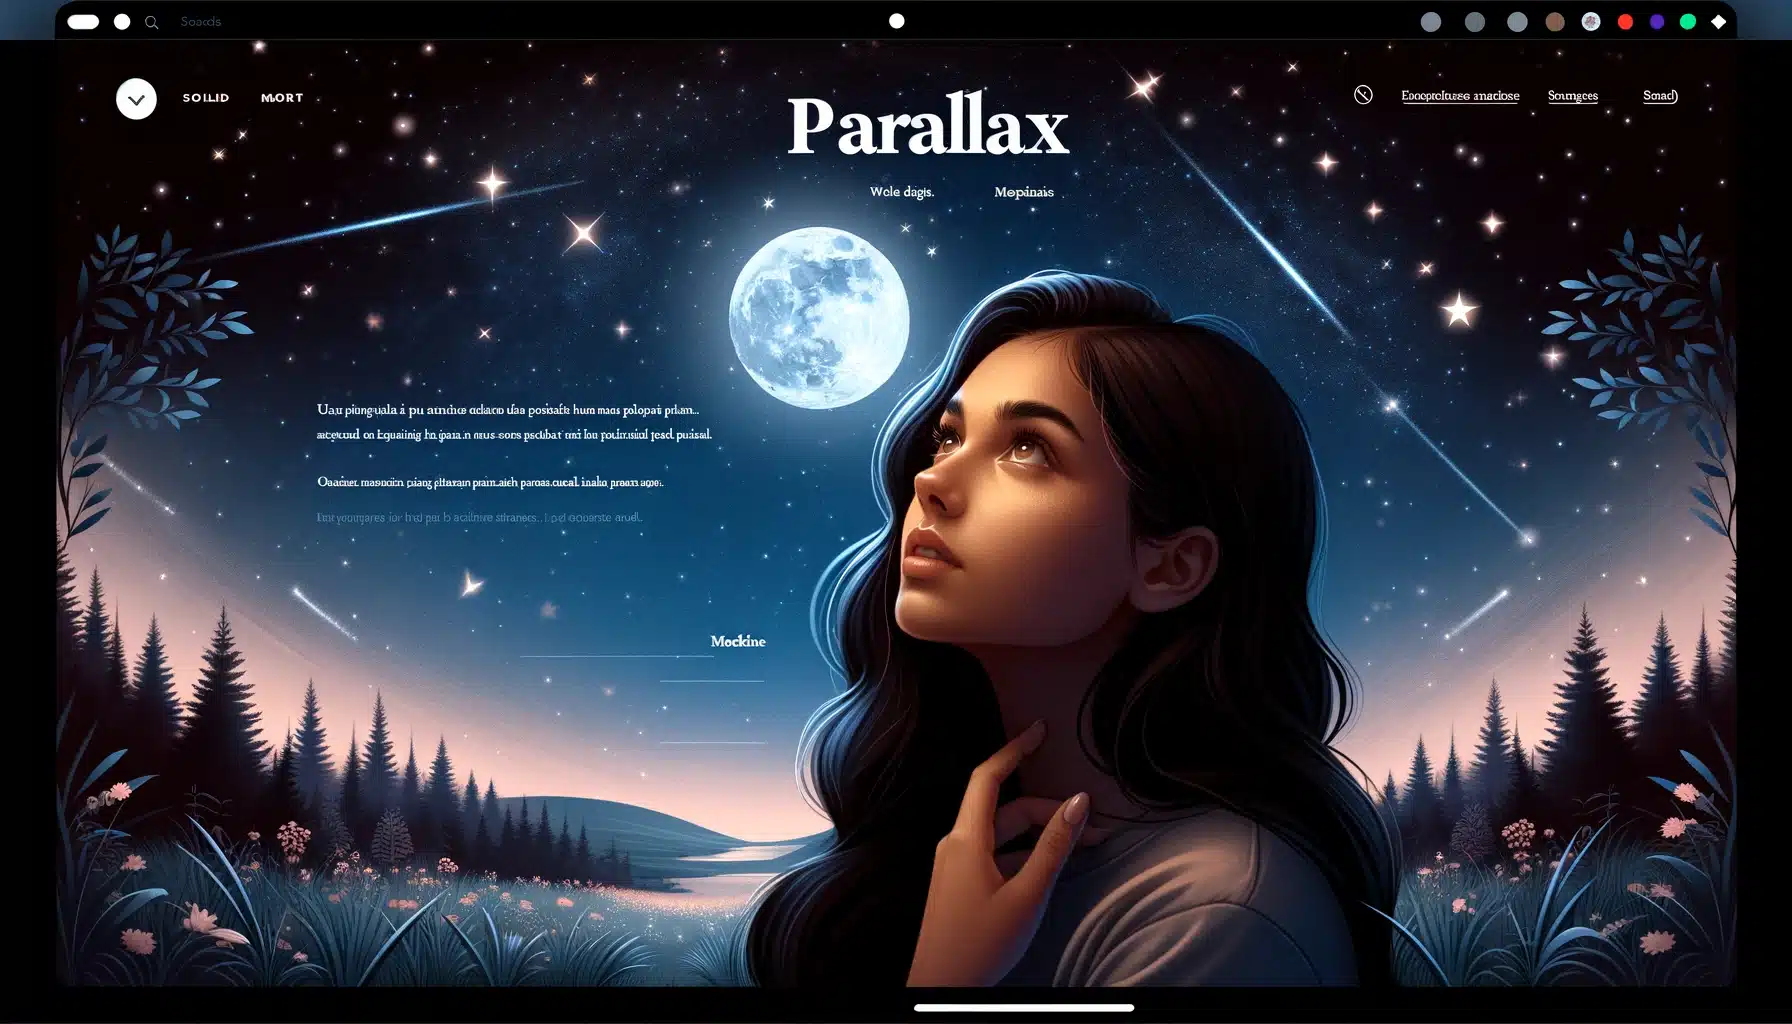 What is the parallax effect?